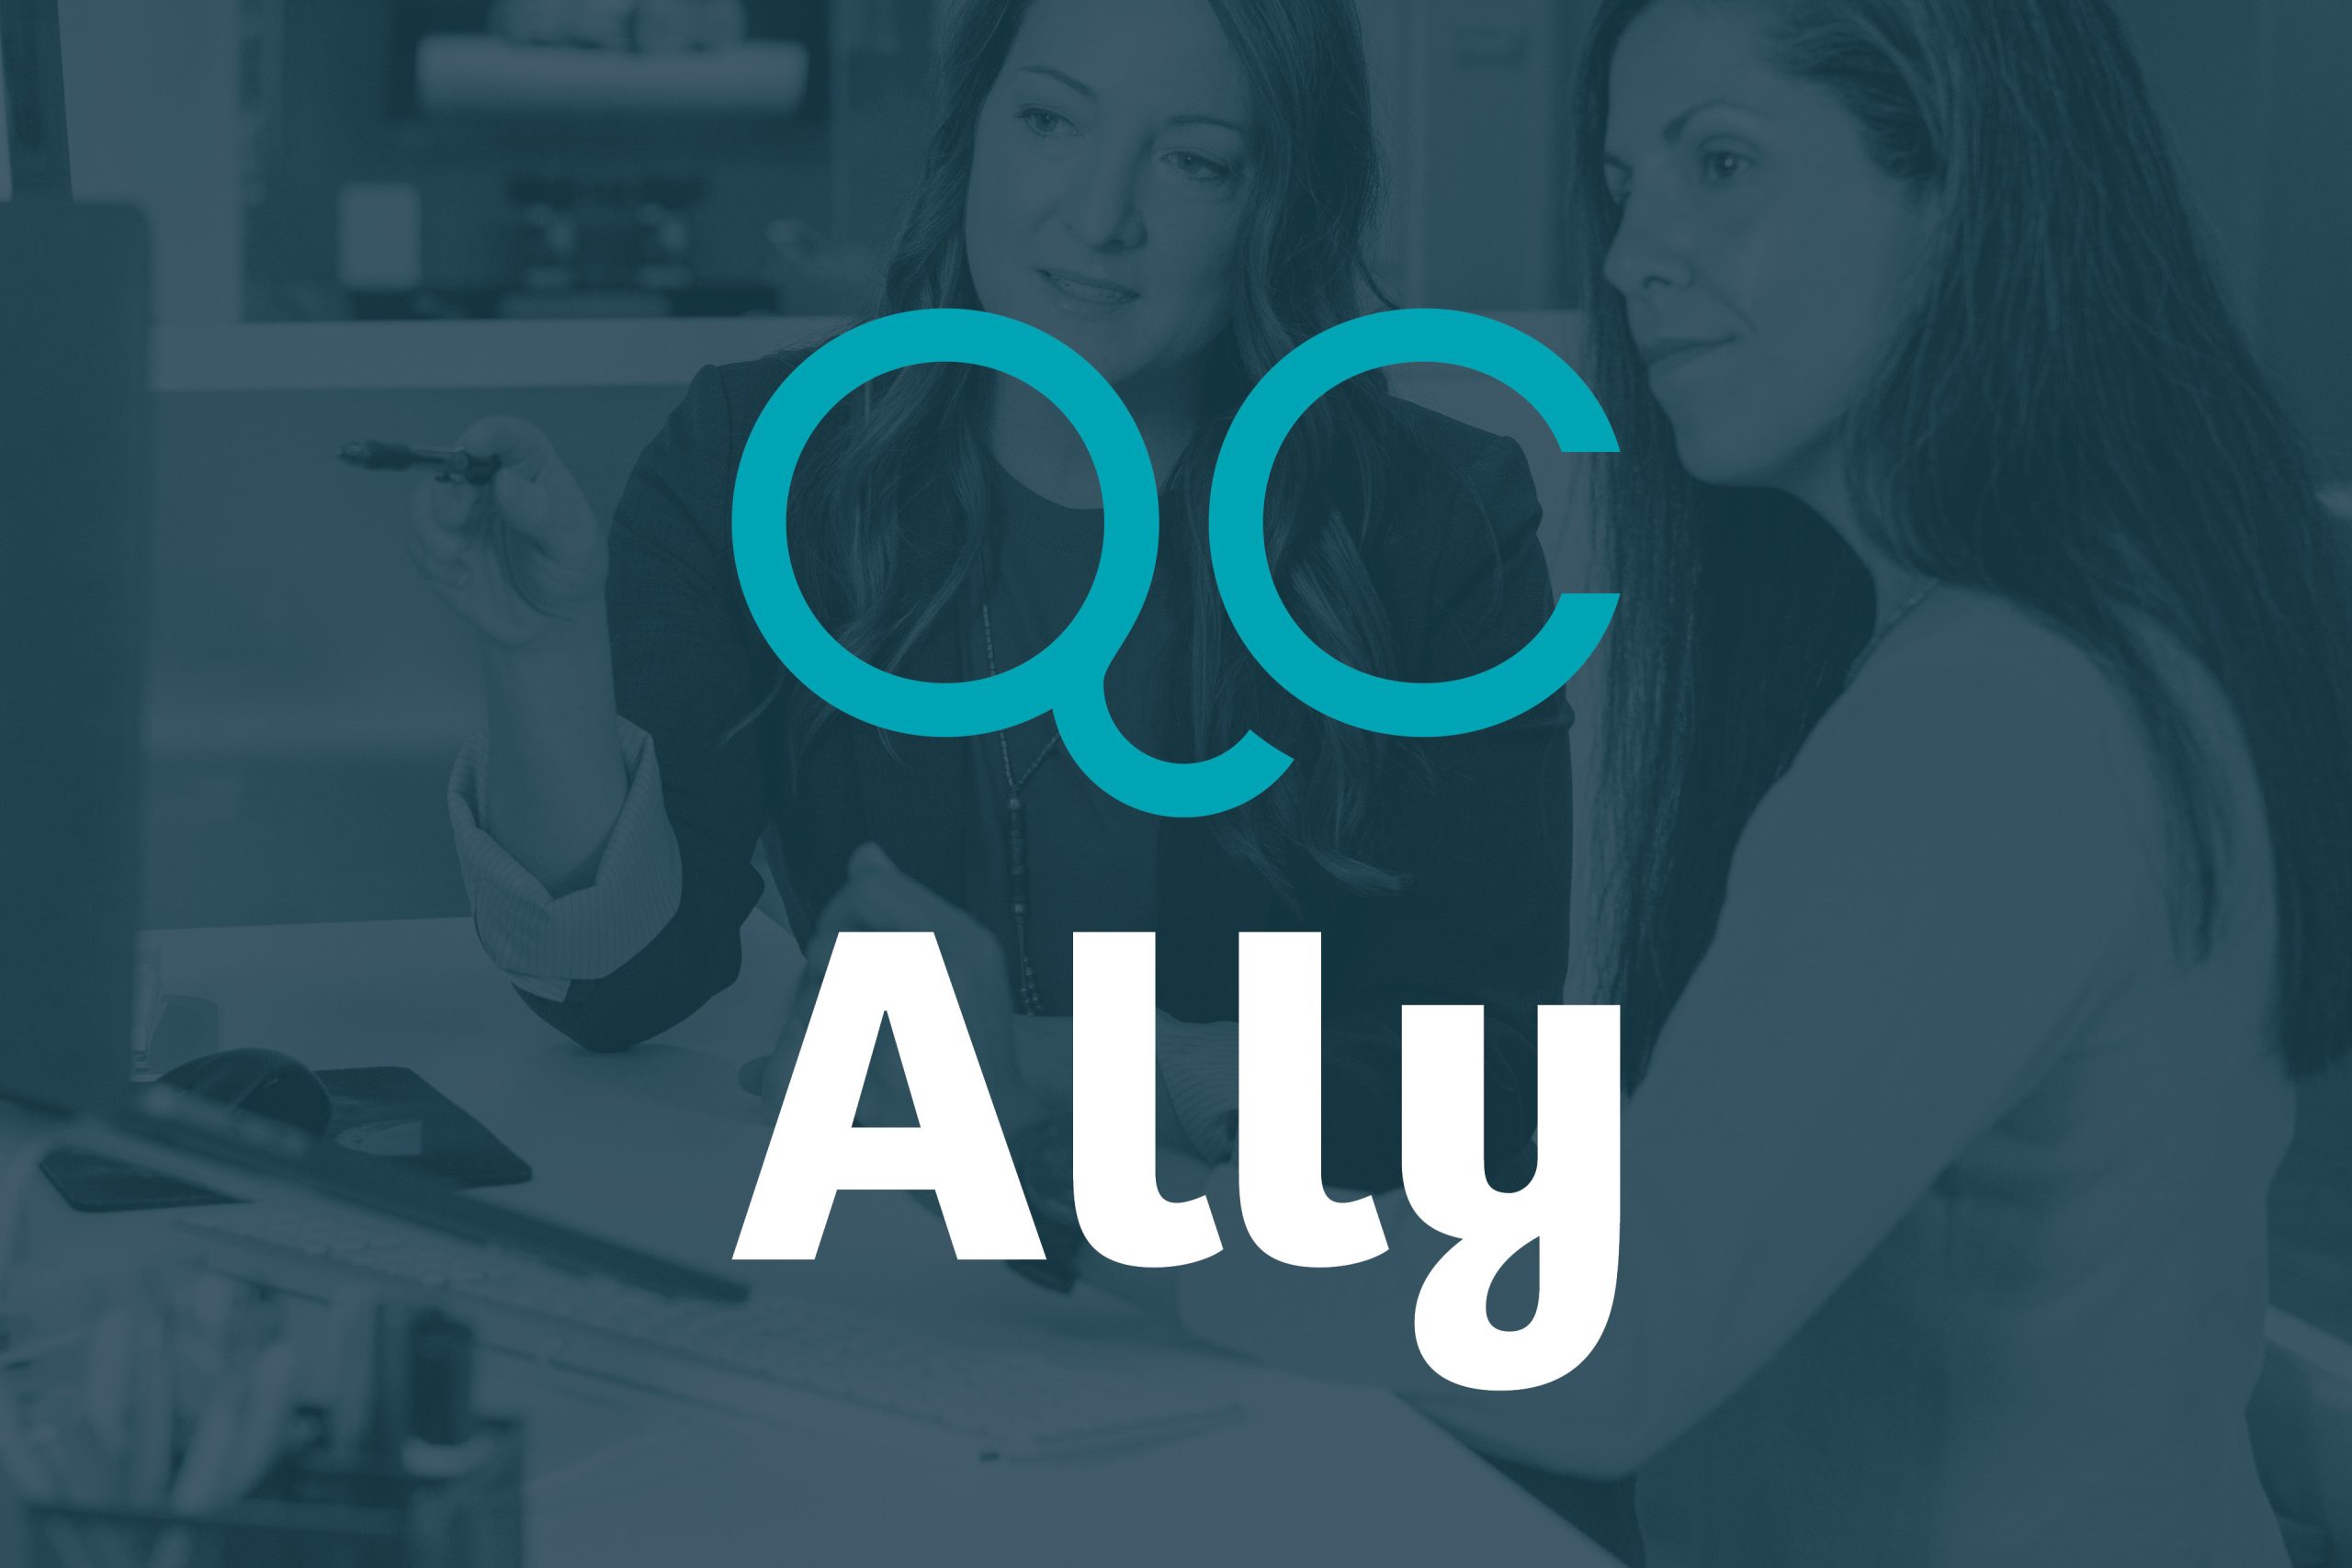 QC Ally Appoints Nicole Booth as Chief Executive Officer to Support Long-Term QC Innovation and Growth Objectives